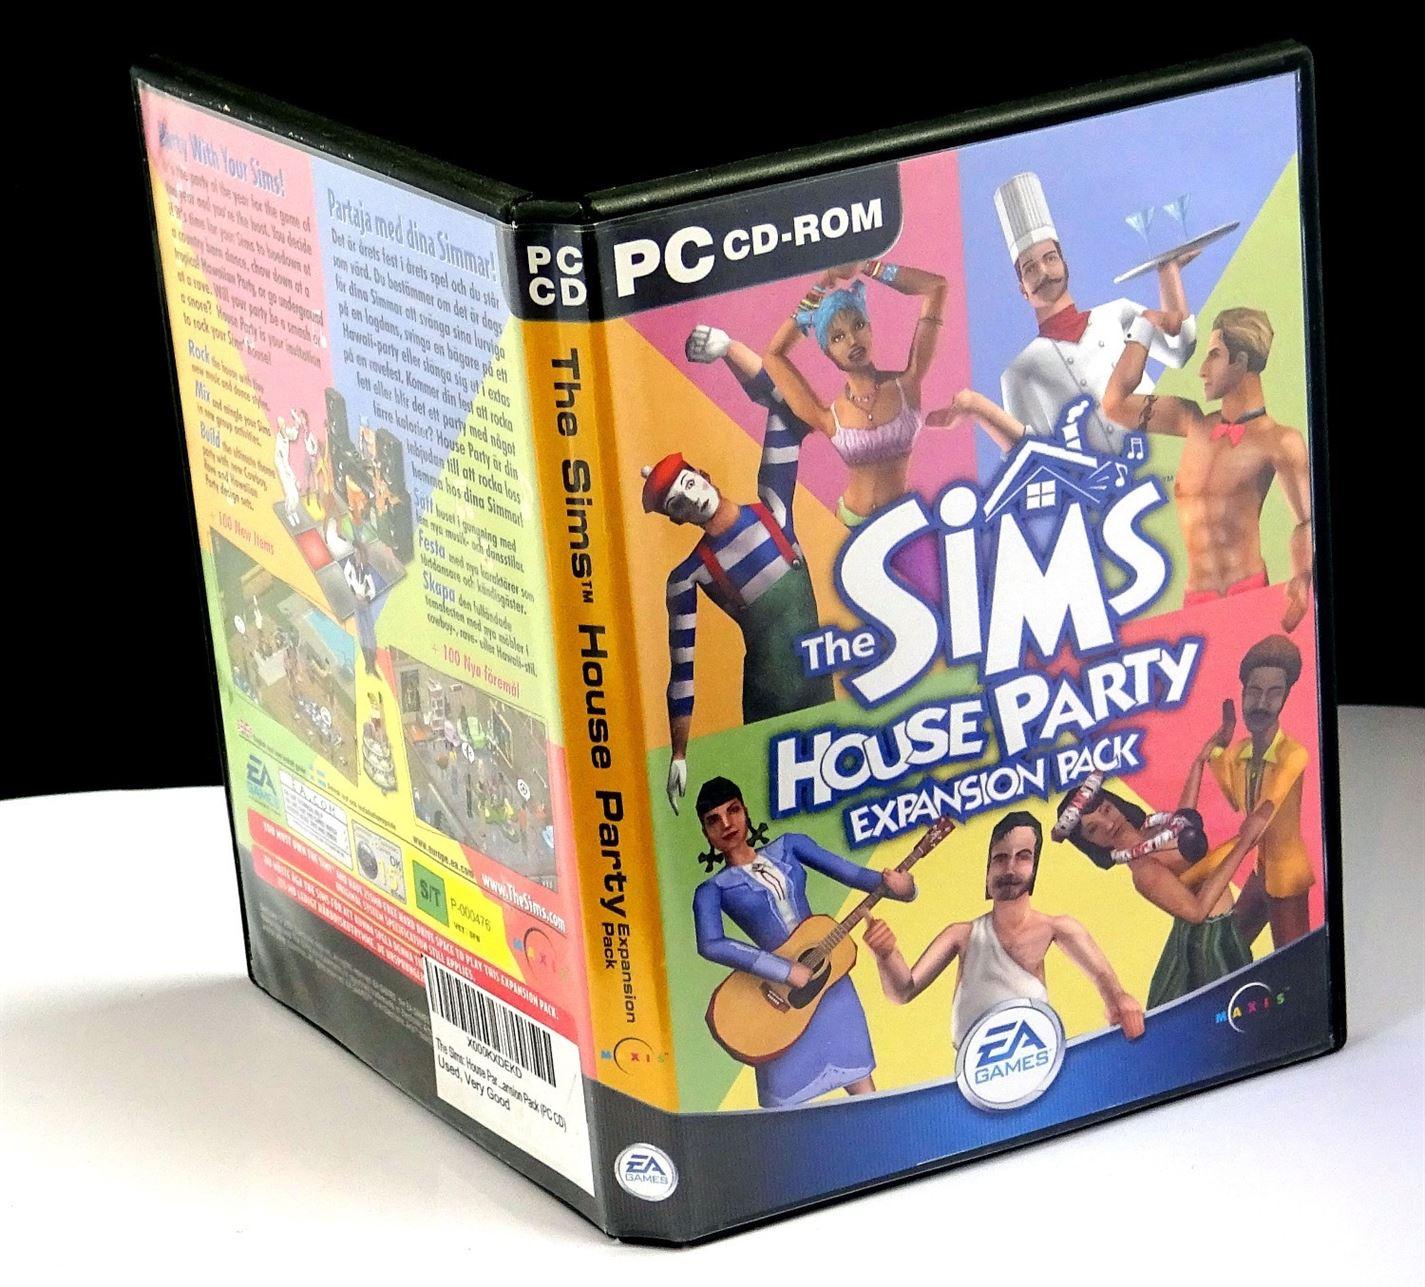 The Sims: House Party Expansion Pack (PC) - UK Seller NP